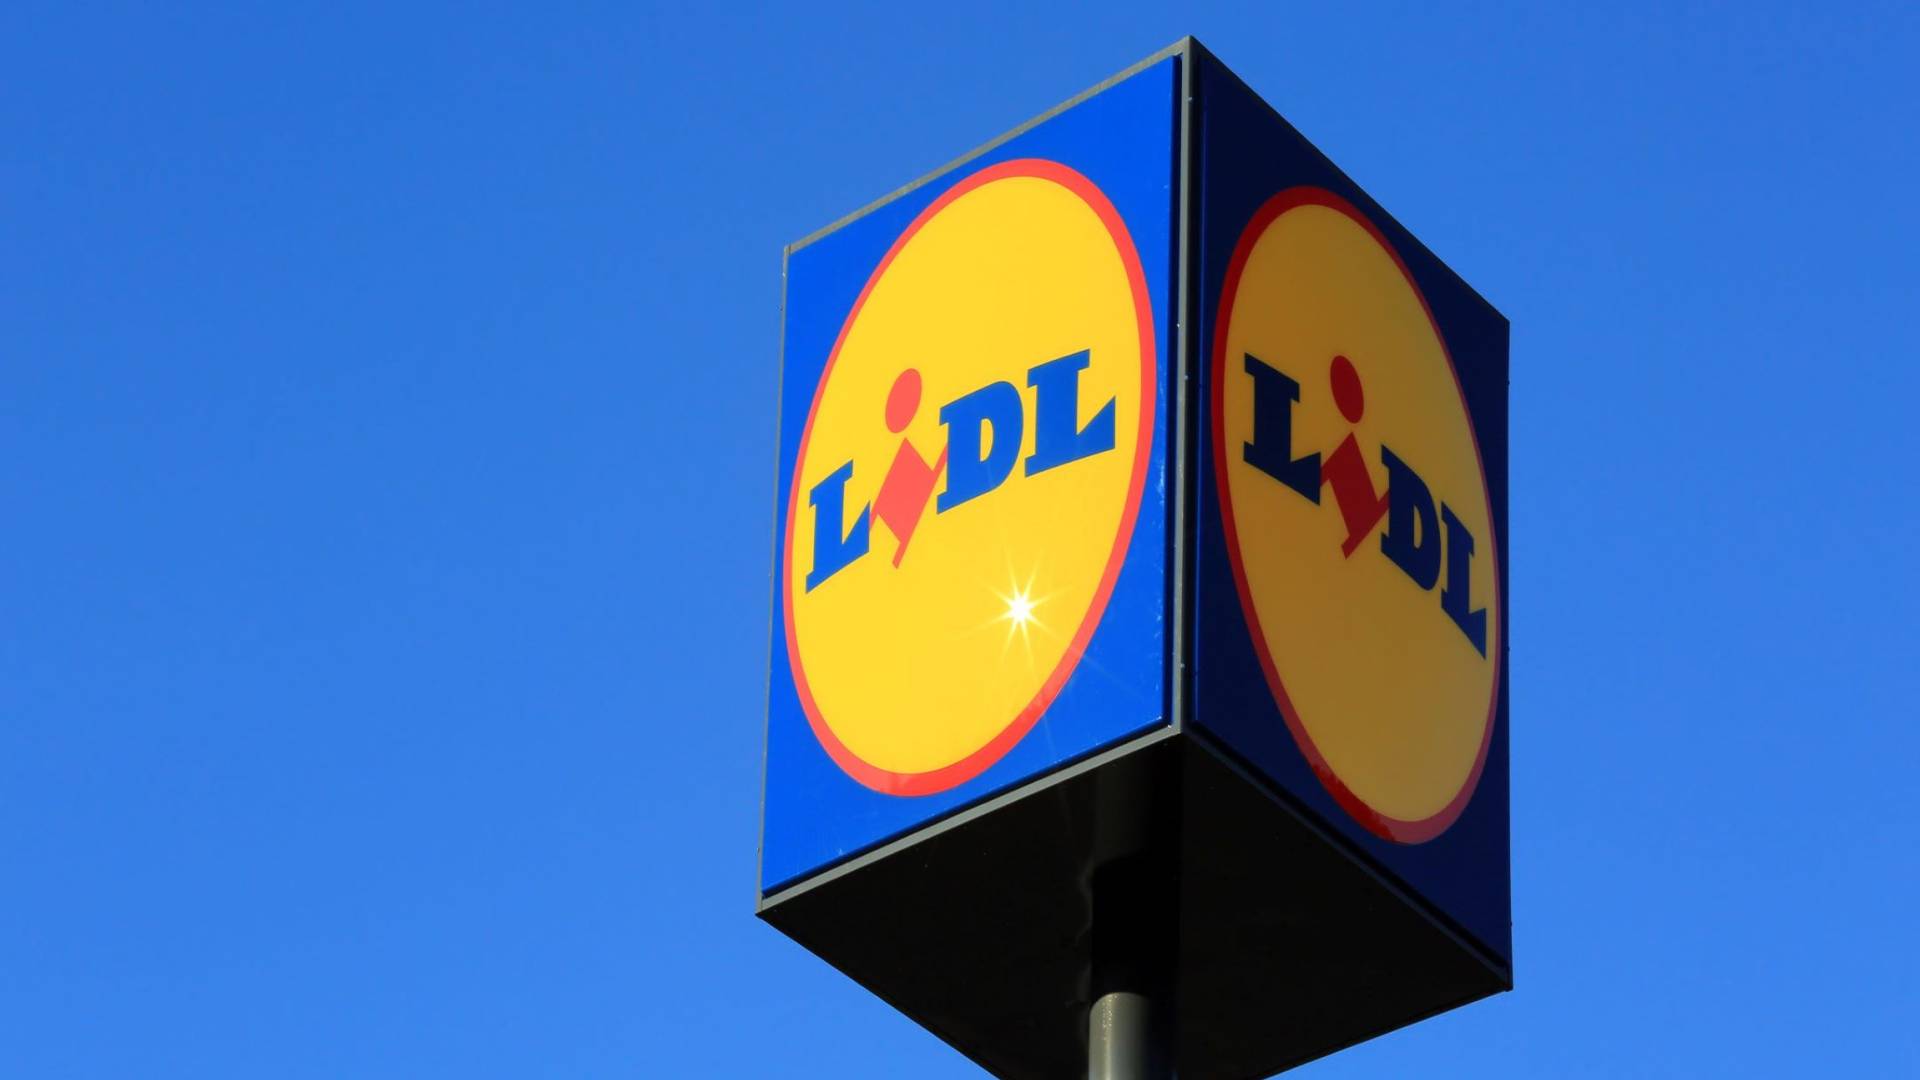 Lidl Asia Pte Limited, Hong Kong, Singapore, Food and Retail, Sourcing, Production, Product Development, Quality, Compliance, Sustainability, Merchandising, Logistics, Cross-Functional, Administration, Careers, Social Responsibility, Textile, Soft Goods, Hard Goods